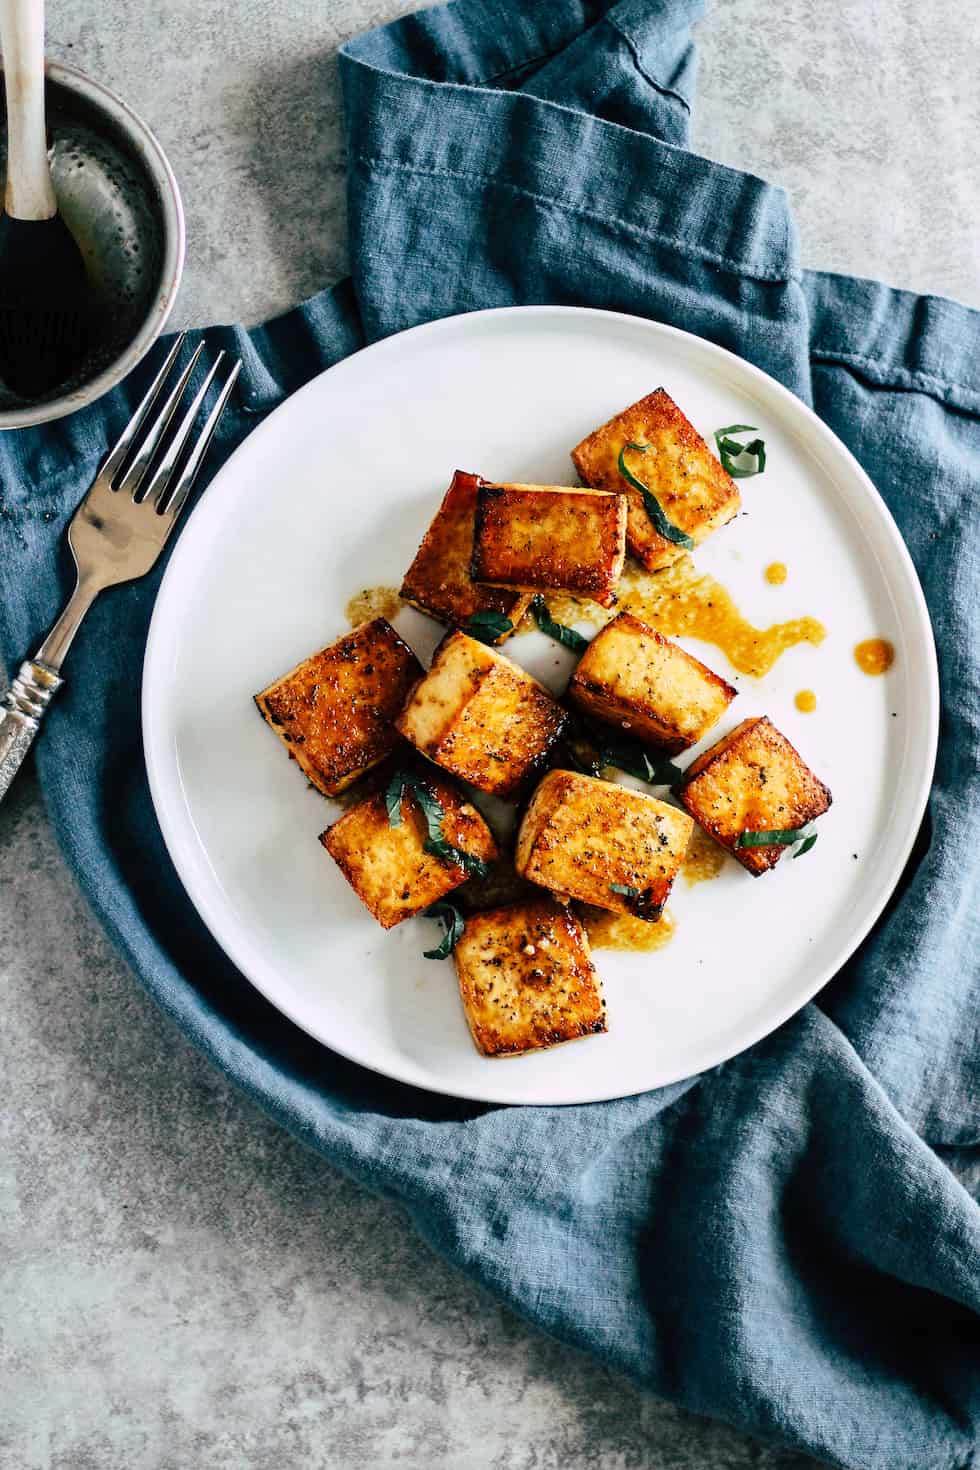 Crispy tofu on white plate with blue linen napkin against grey background.